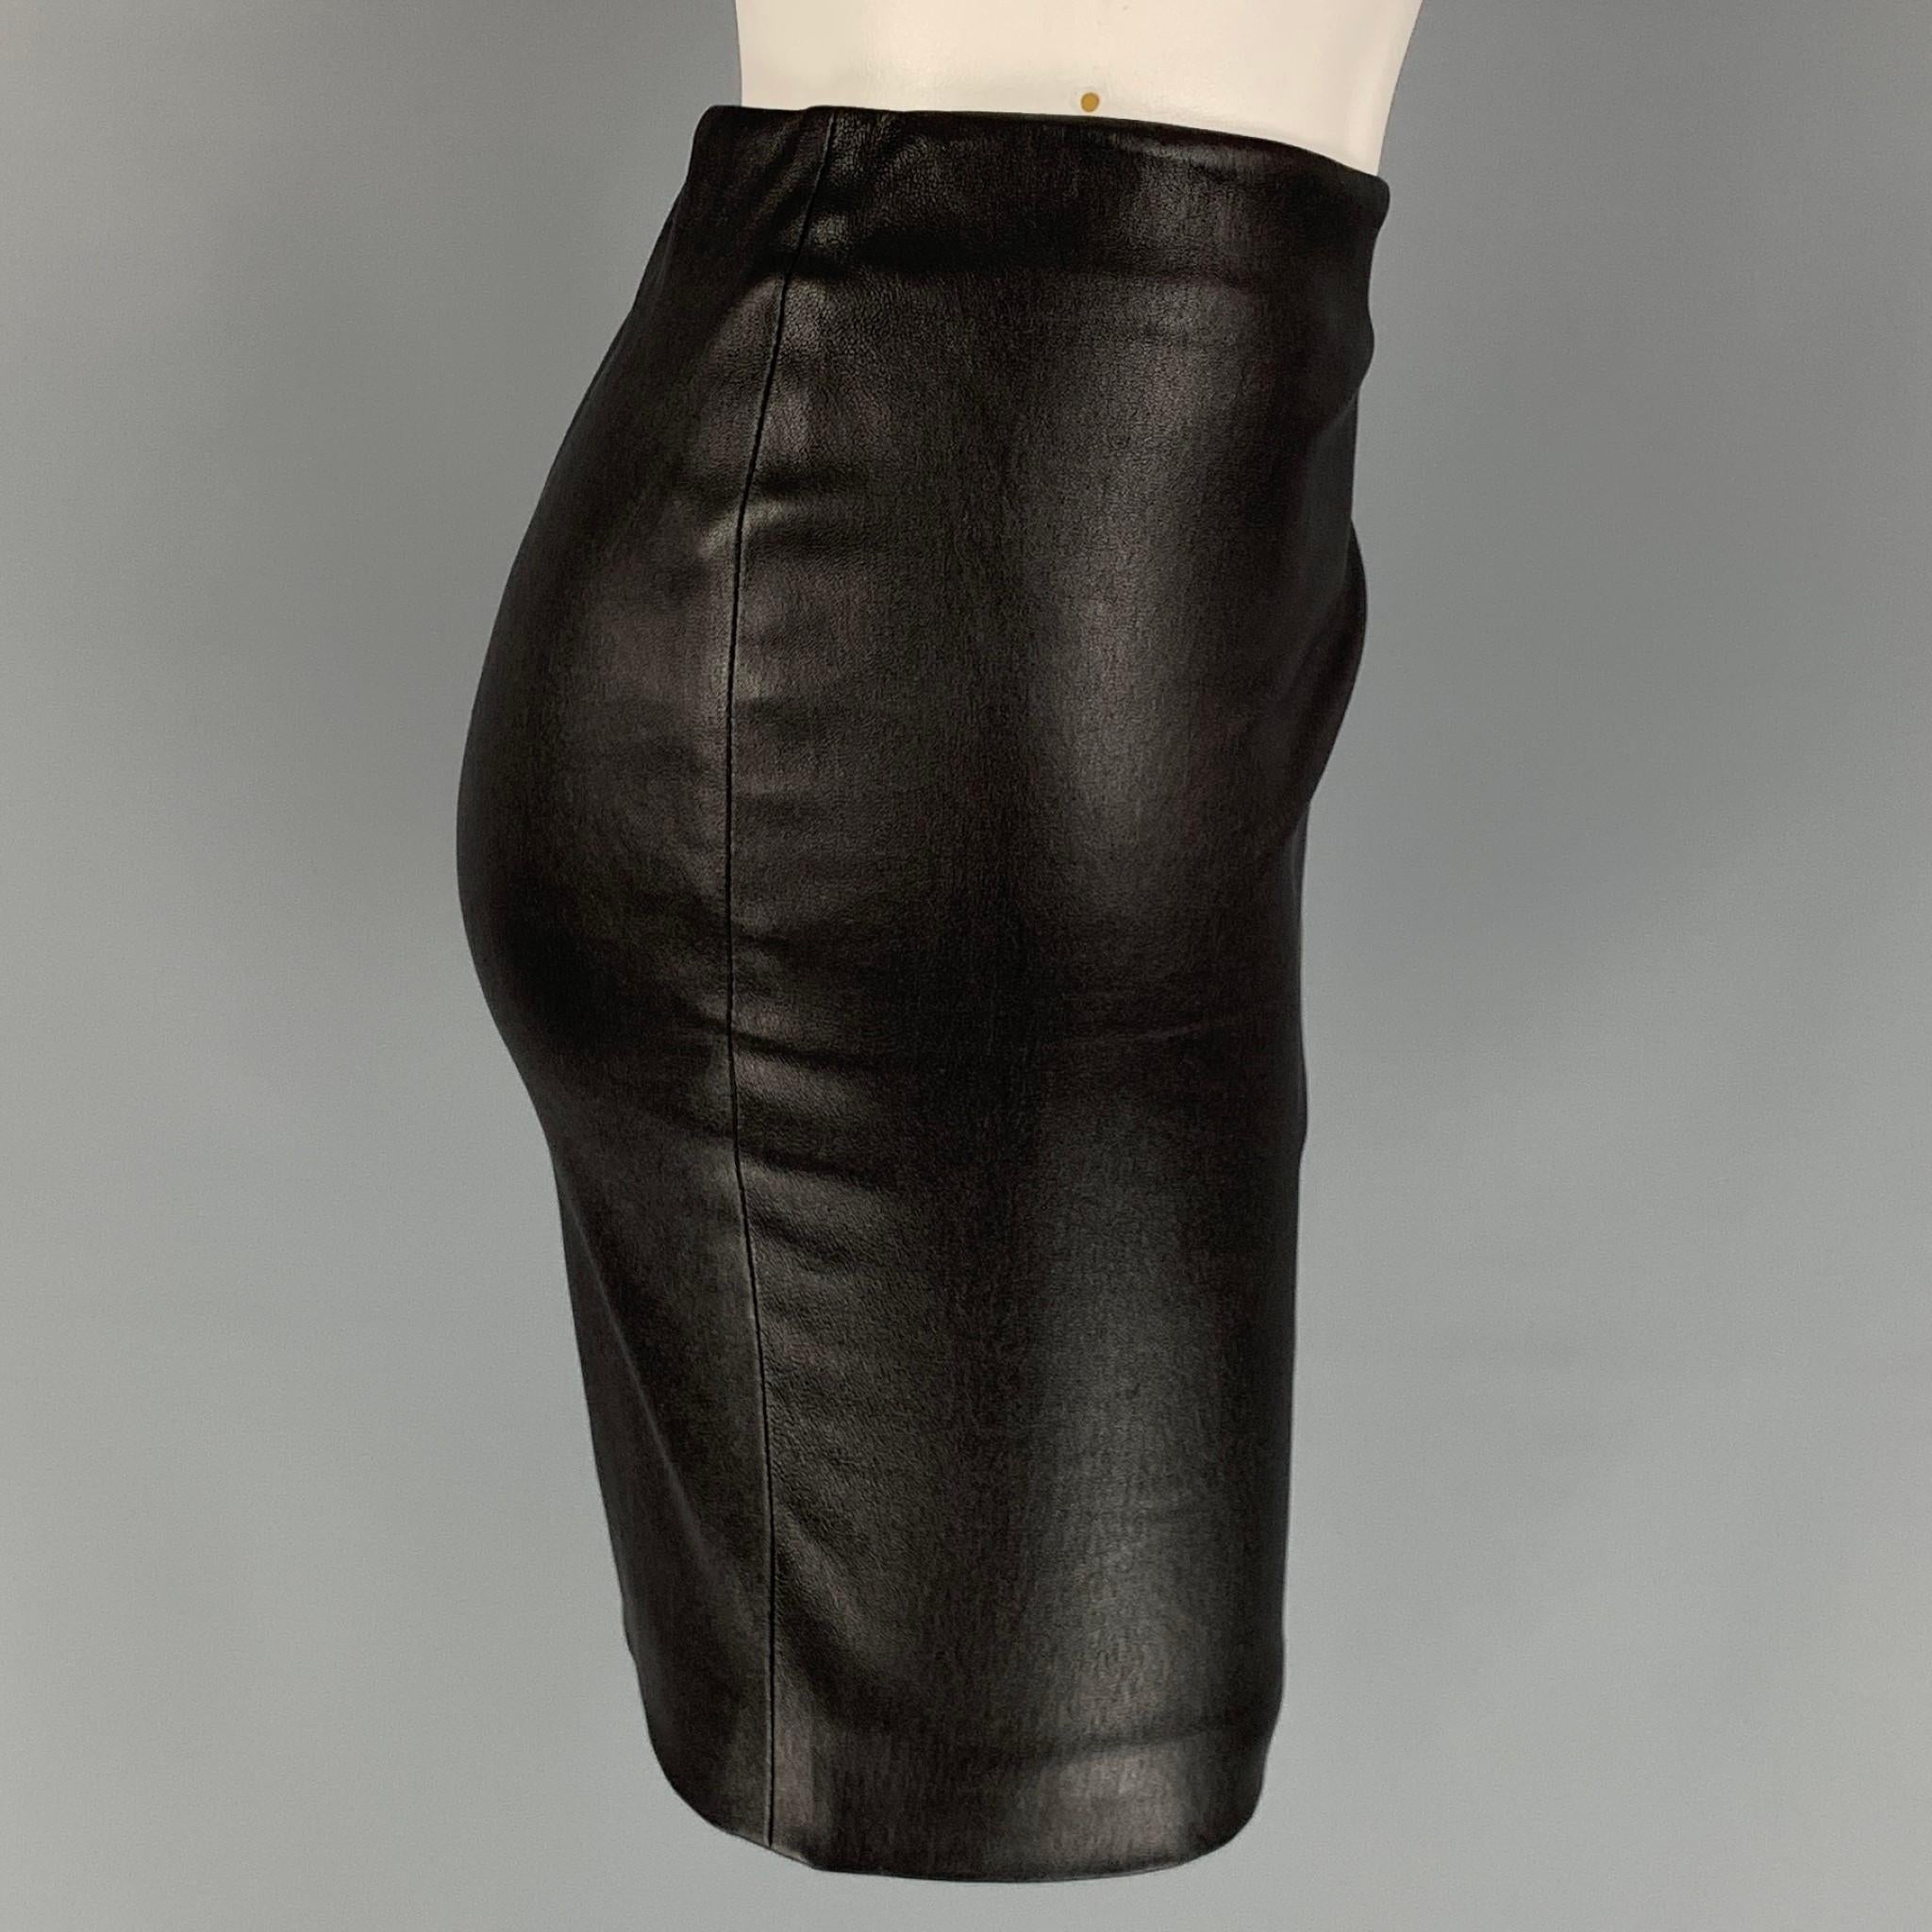 THE ROW mini skirt comes in a black lambskin stretch leather featuring a elastic waistband. Made in USA, 

Very Good Pre-Owned Condition.
Marked: 4
Original Retail Price: $1,690.00

Measurements:

Waist: 29 in.
Length: 16 in. 